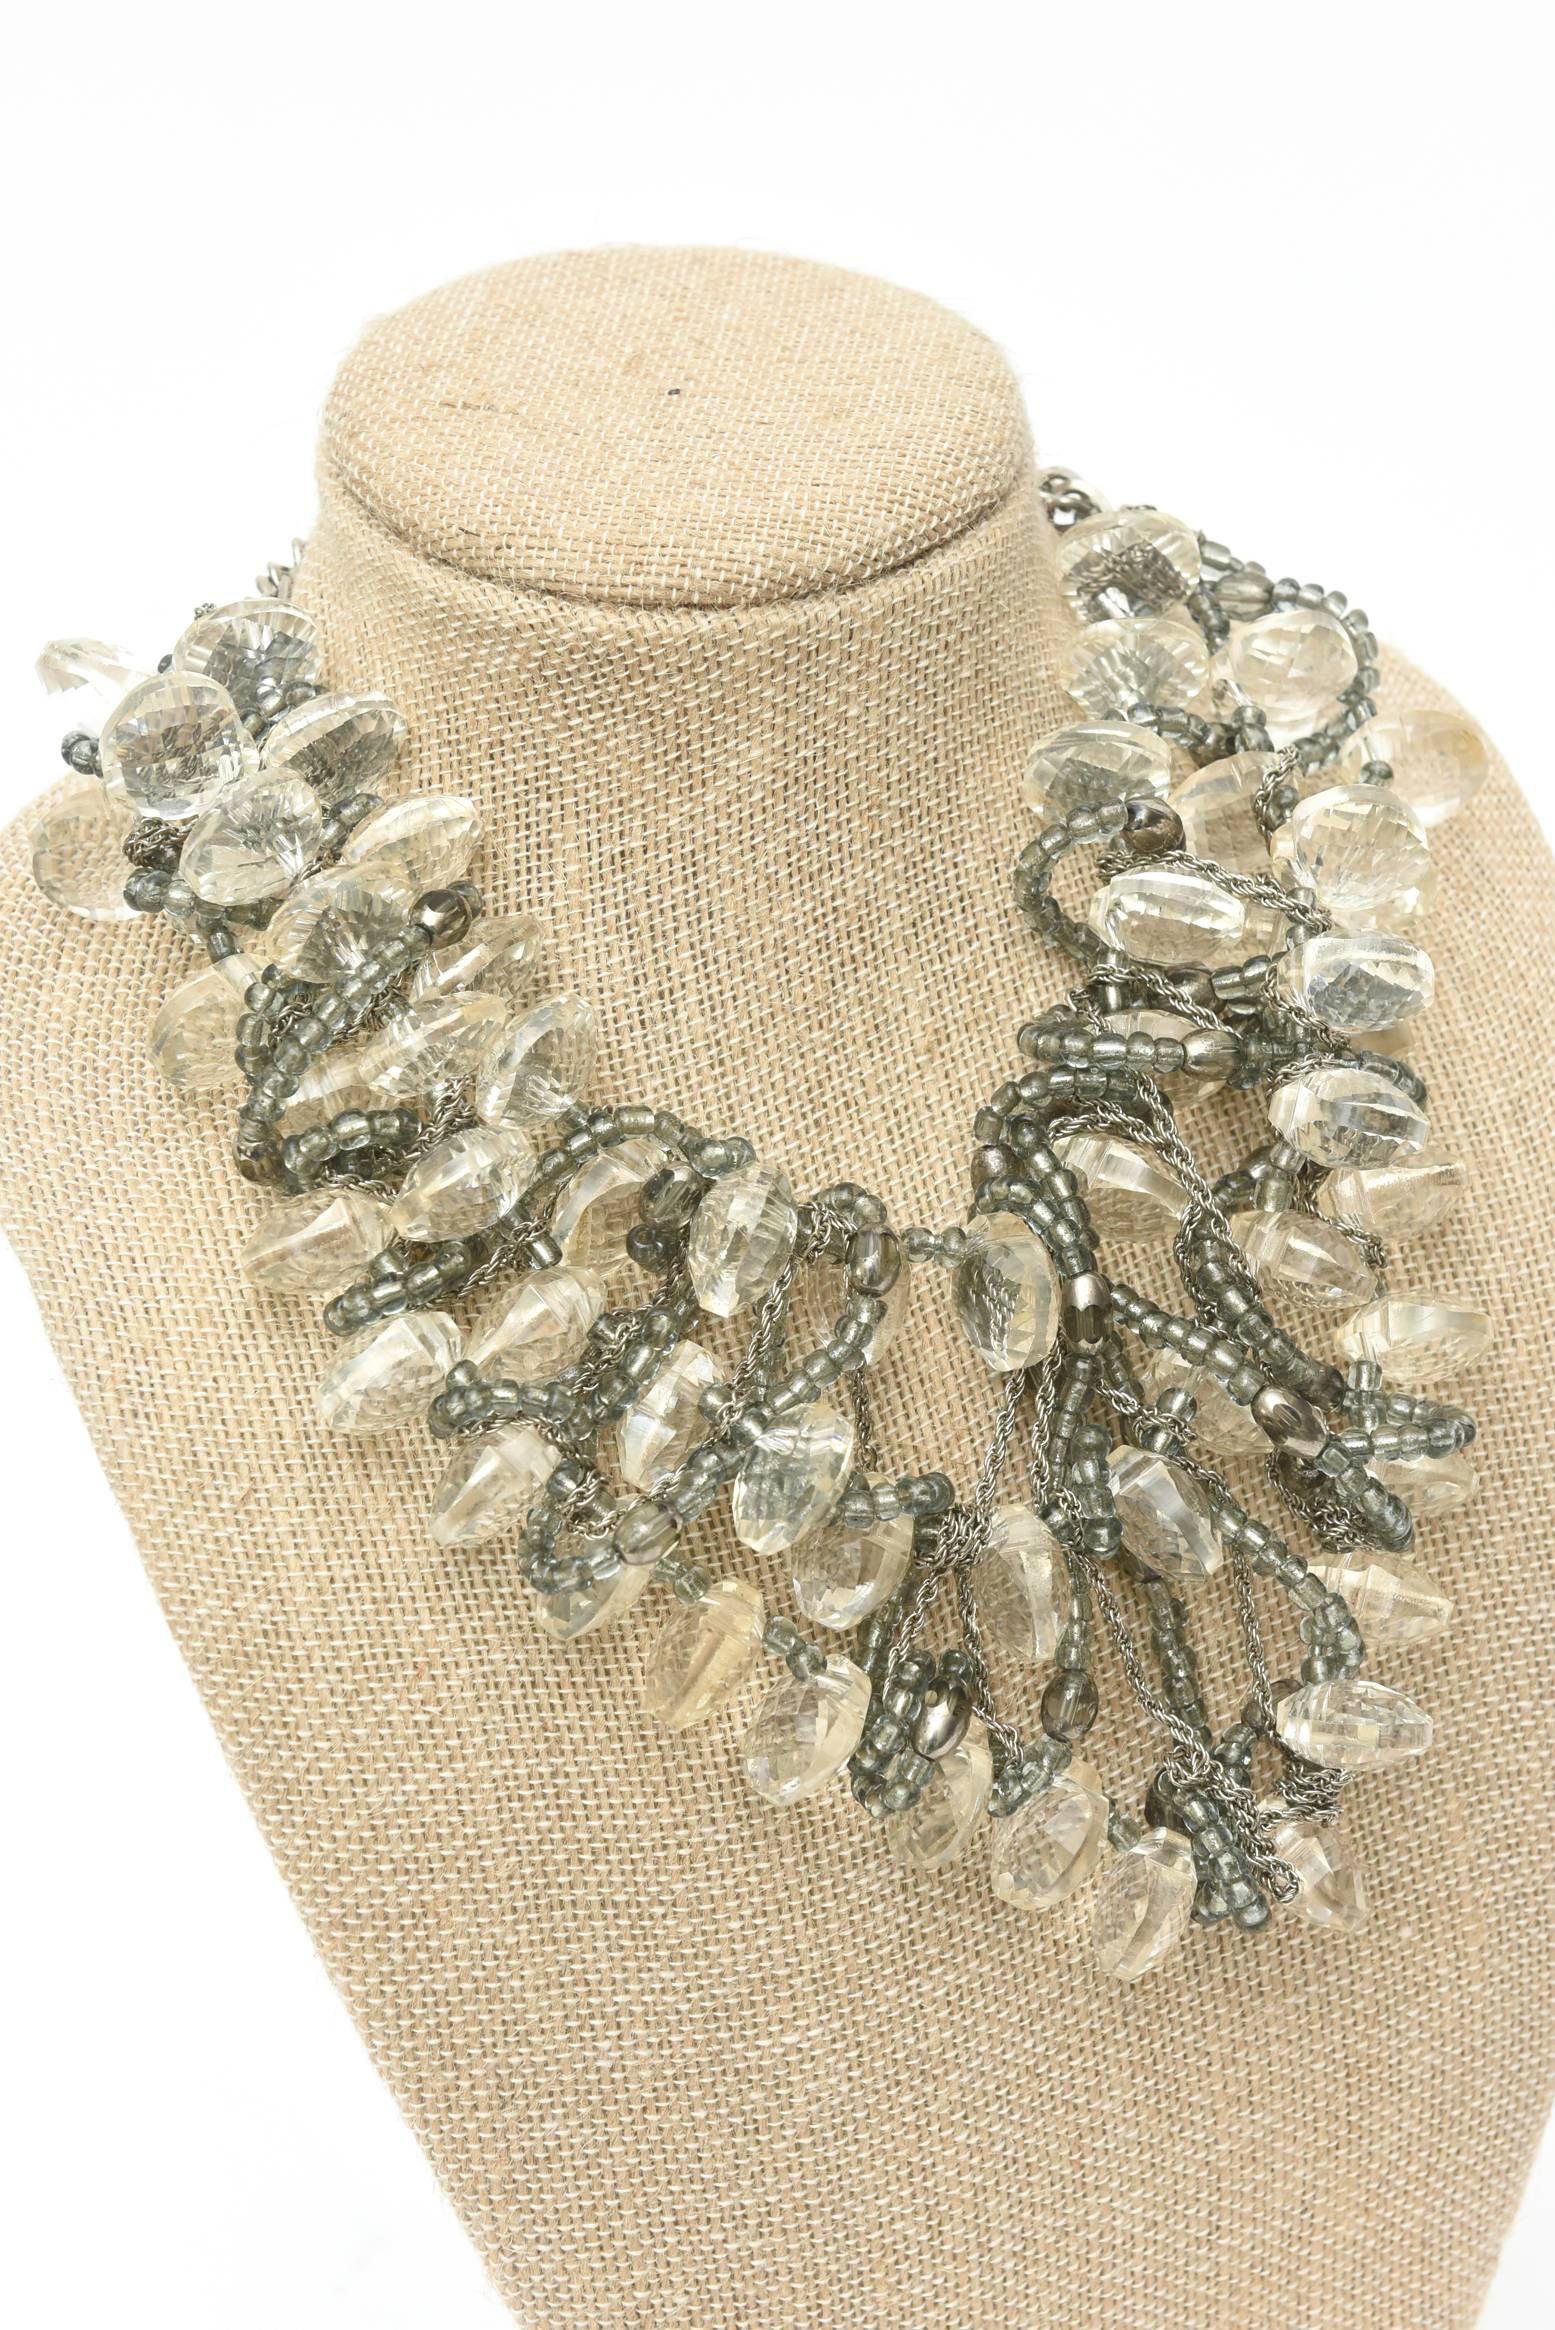 Women's  Faceted Lucite Chain, Beads And Silver Bib Multi Strand Necklace Vintage For Sale